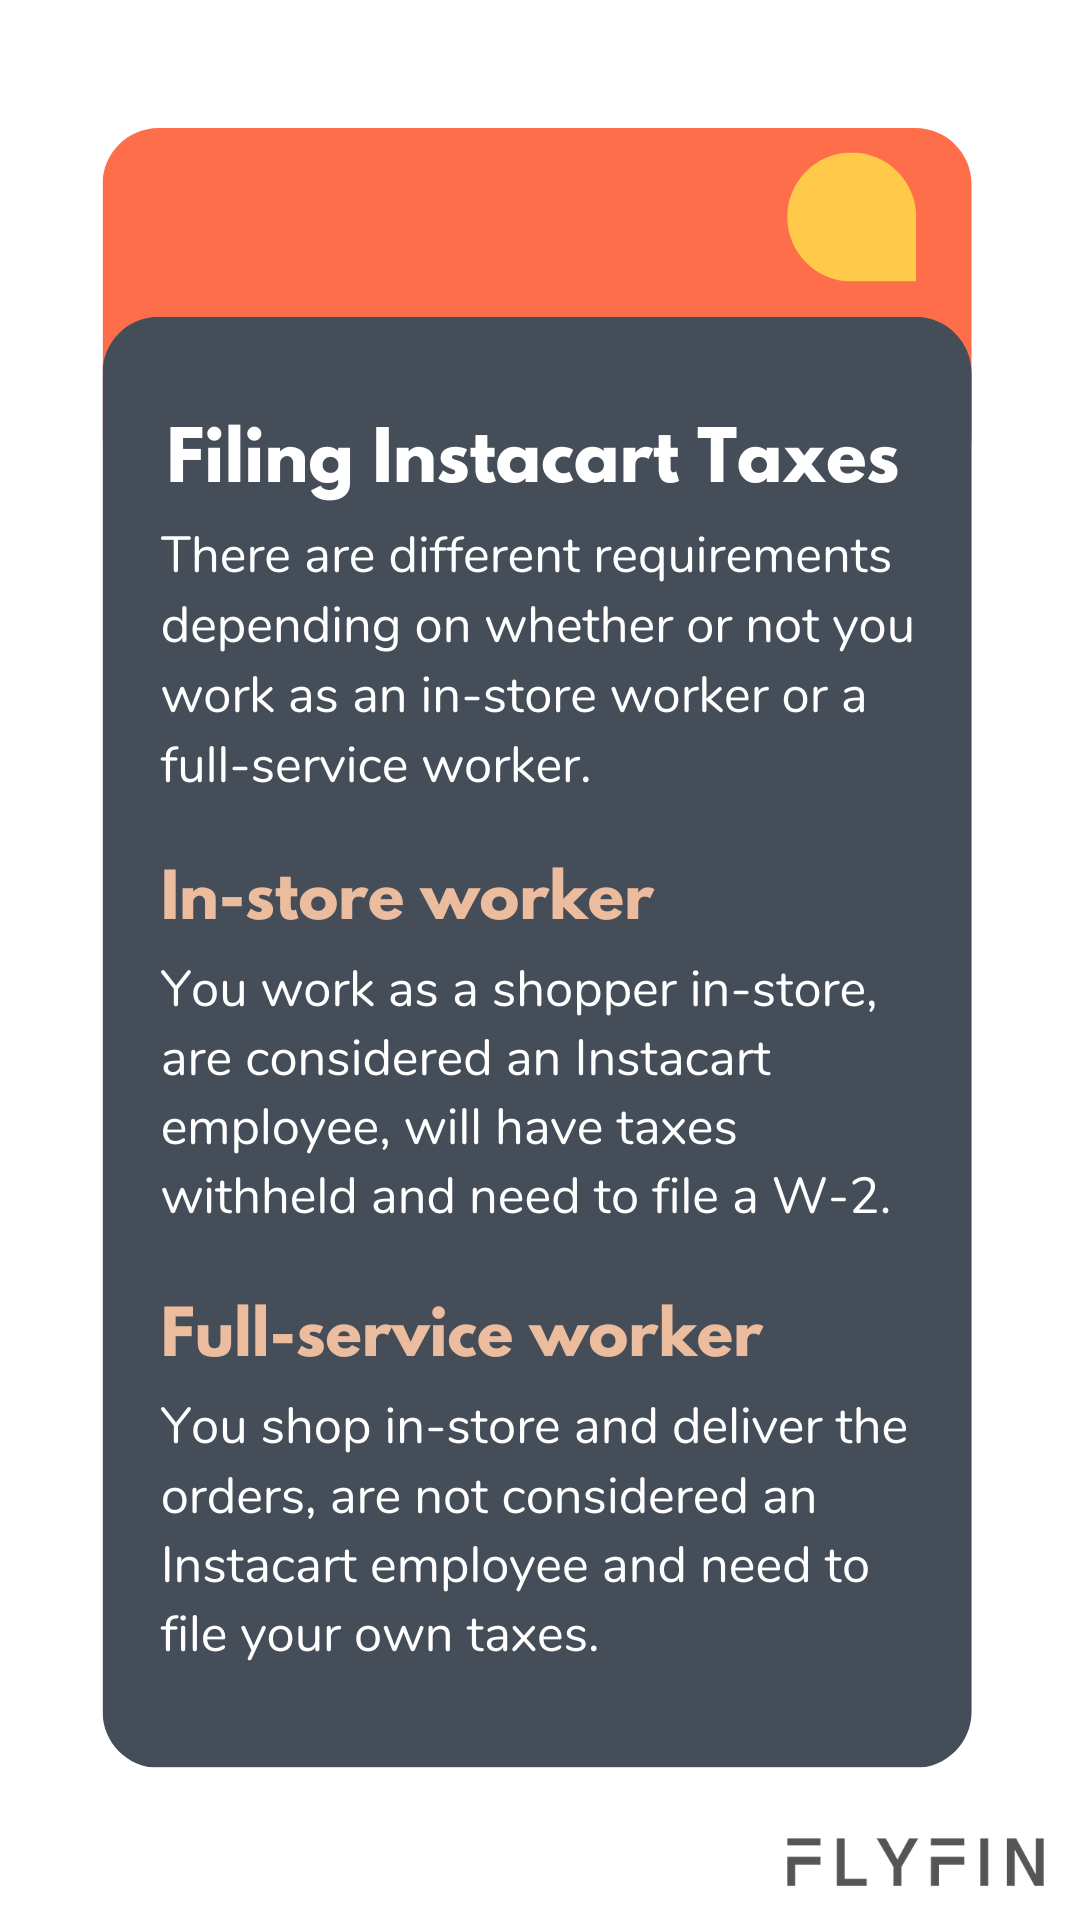 How to file Instacart taxes